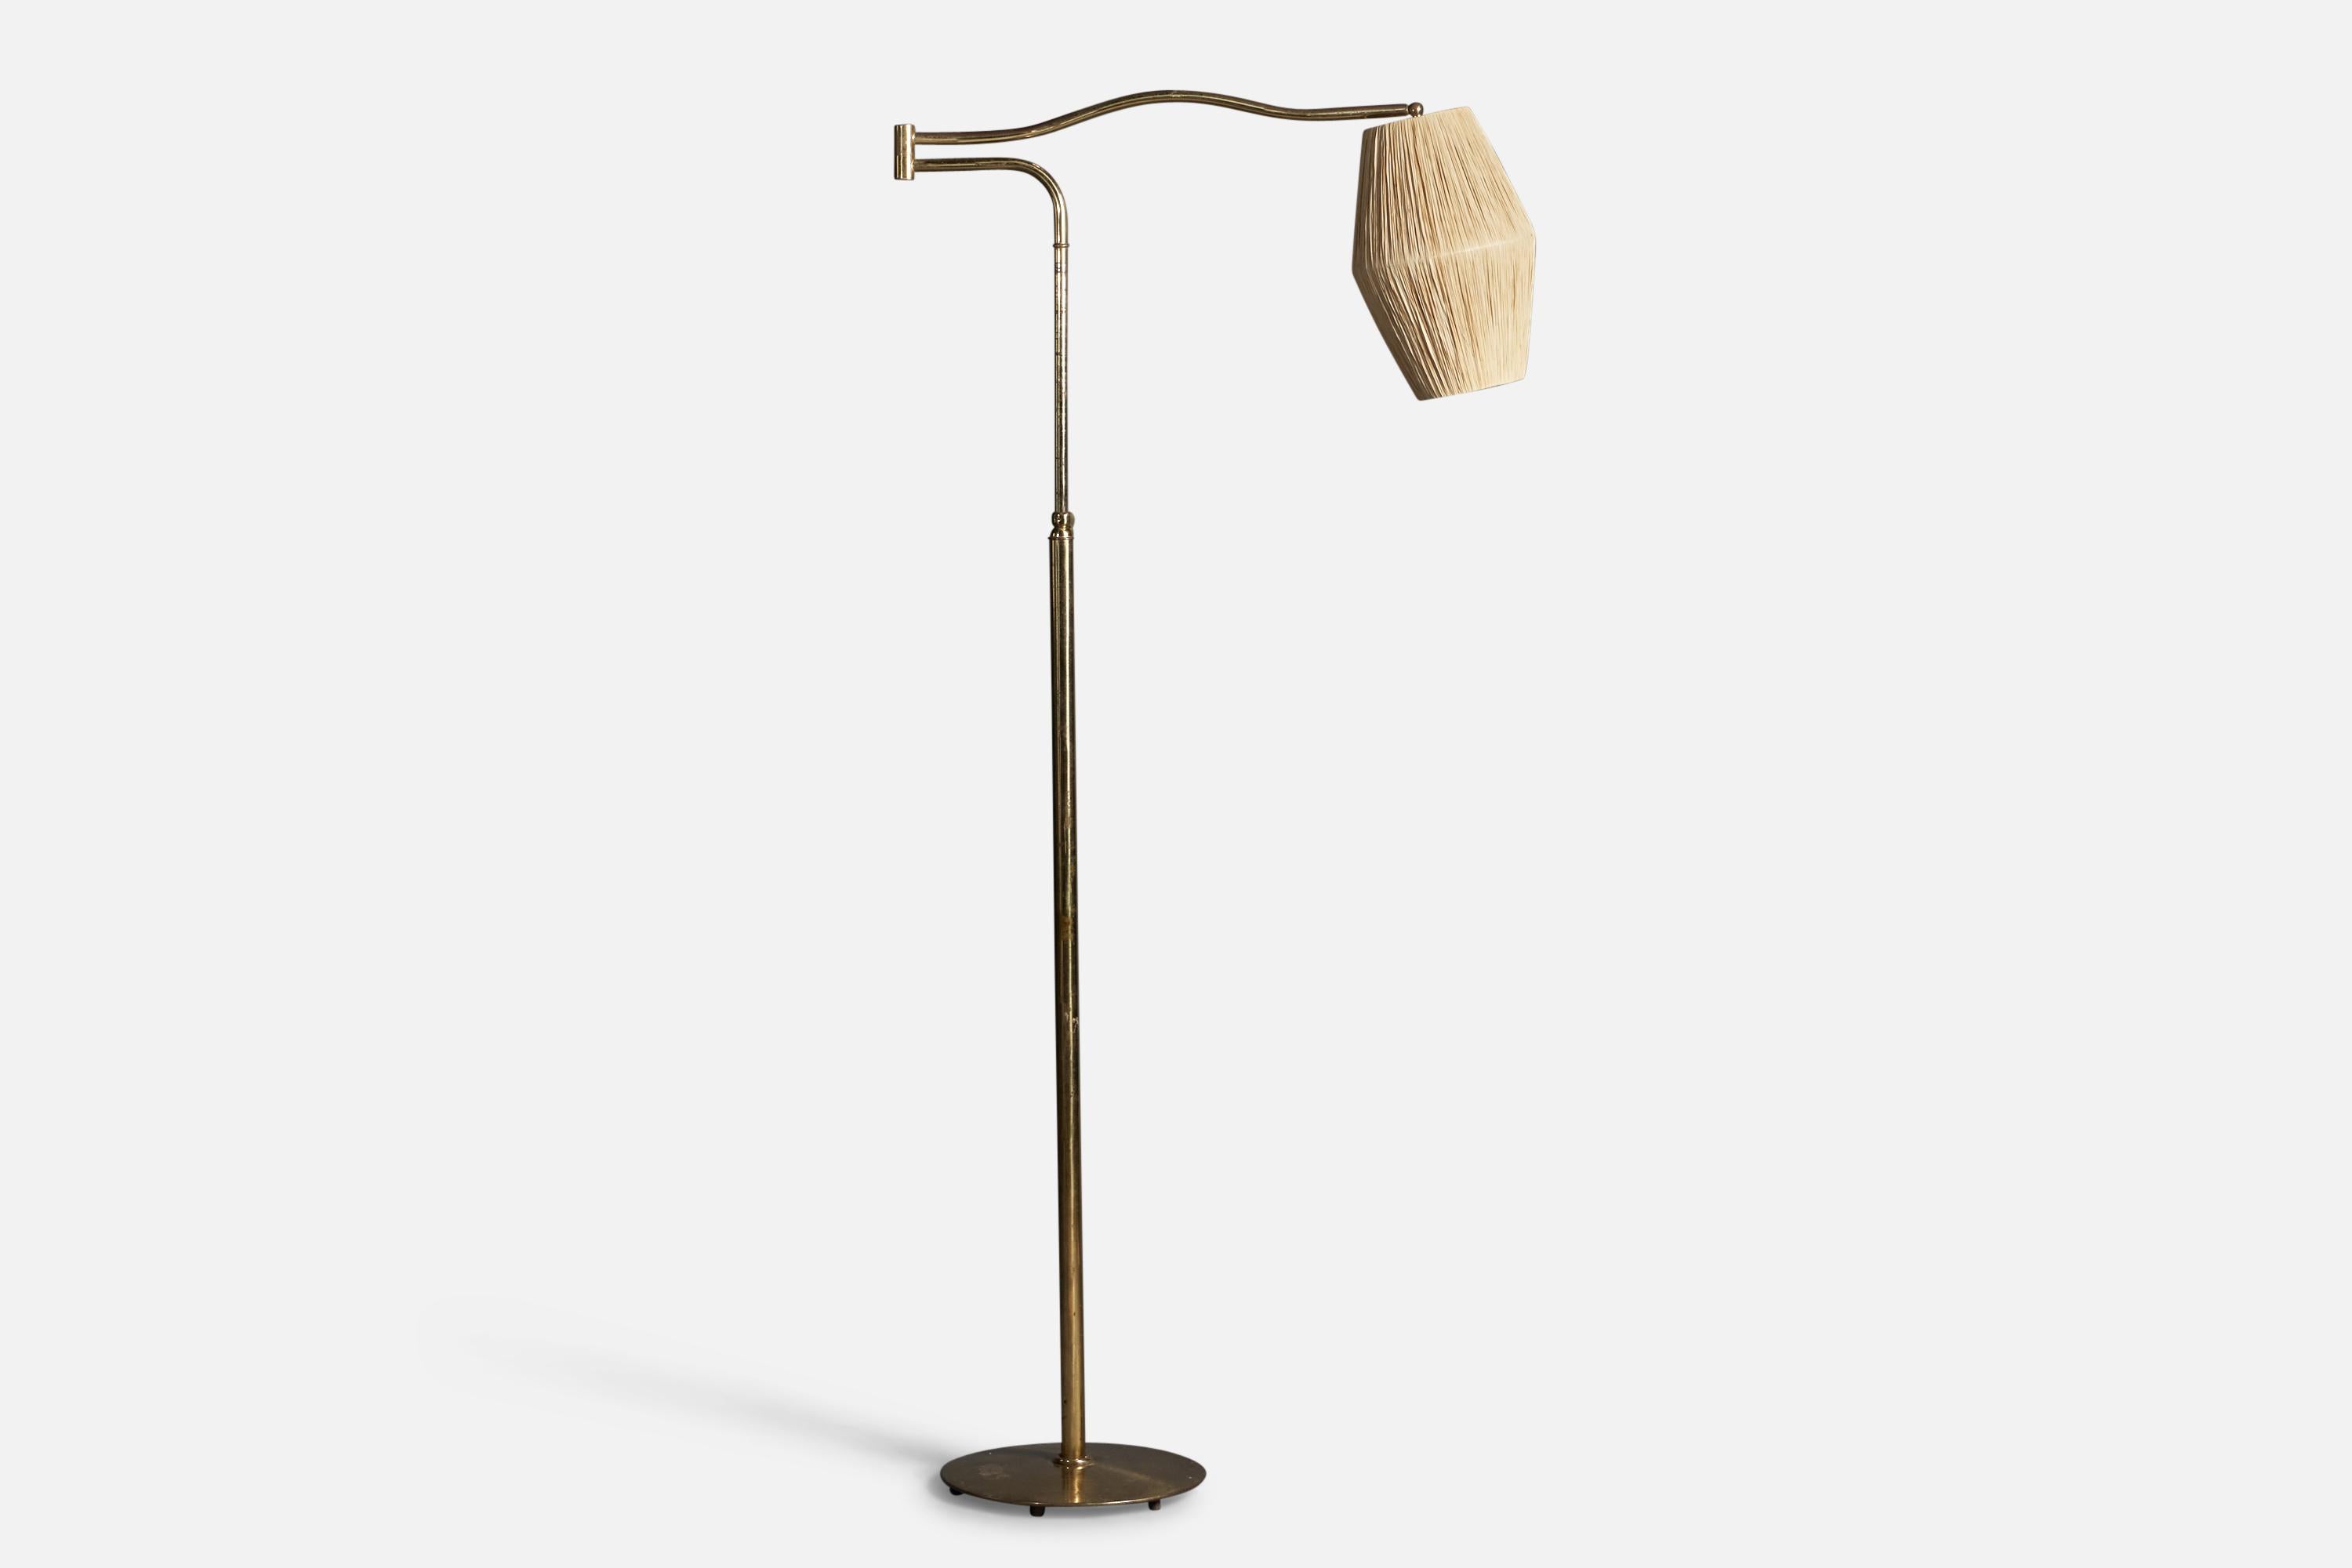 An adjustable brass and raffia floor lamp, designed and produced in Italy, 1940s.

Overall Dimensions: 67.25